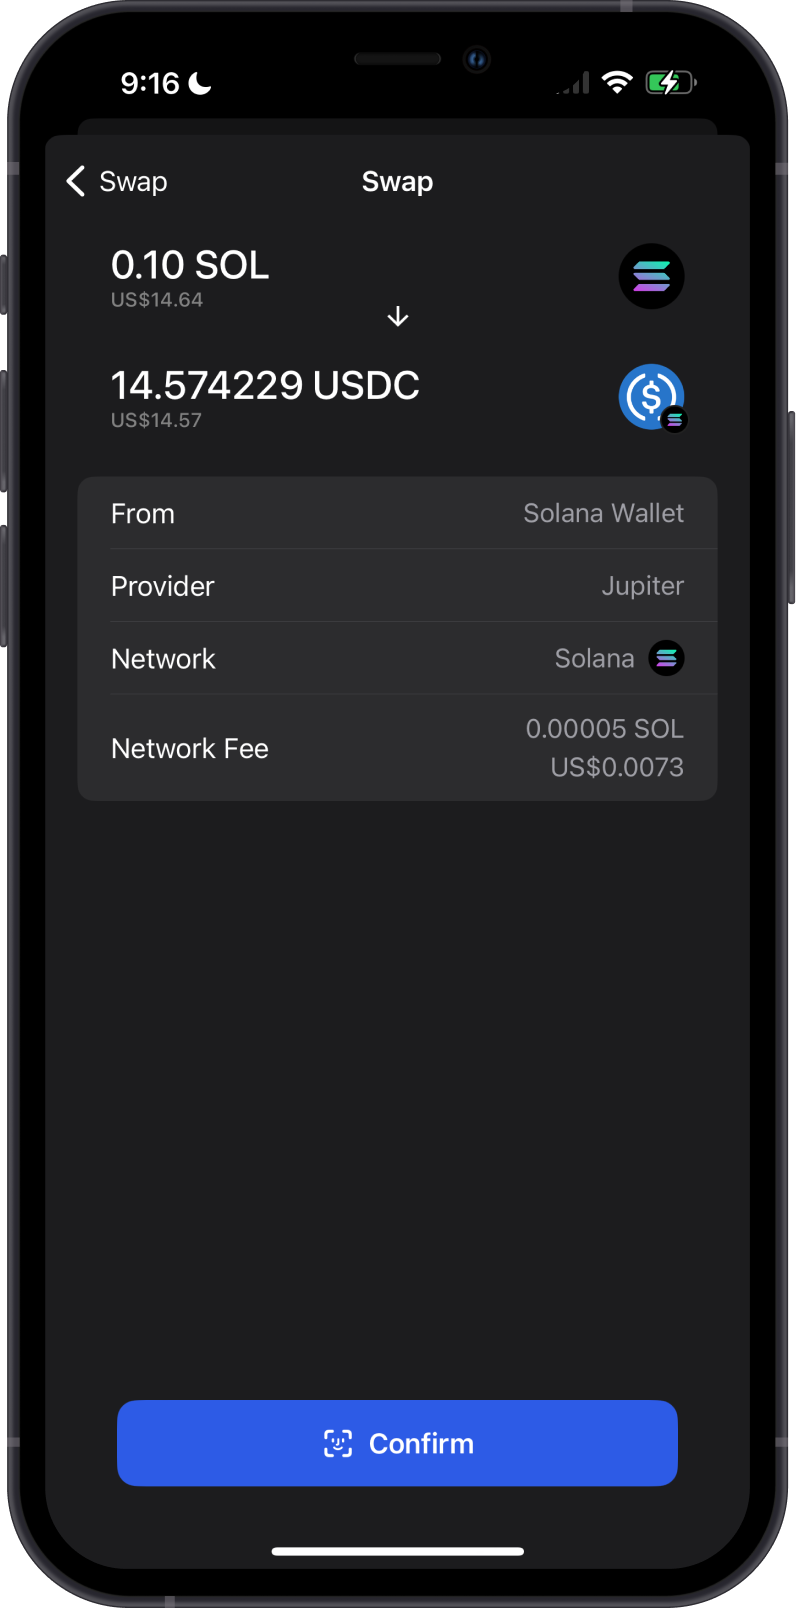 Network Fee when Swapping SPL tokens